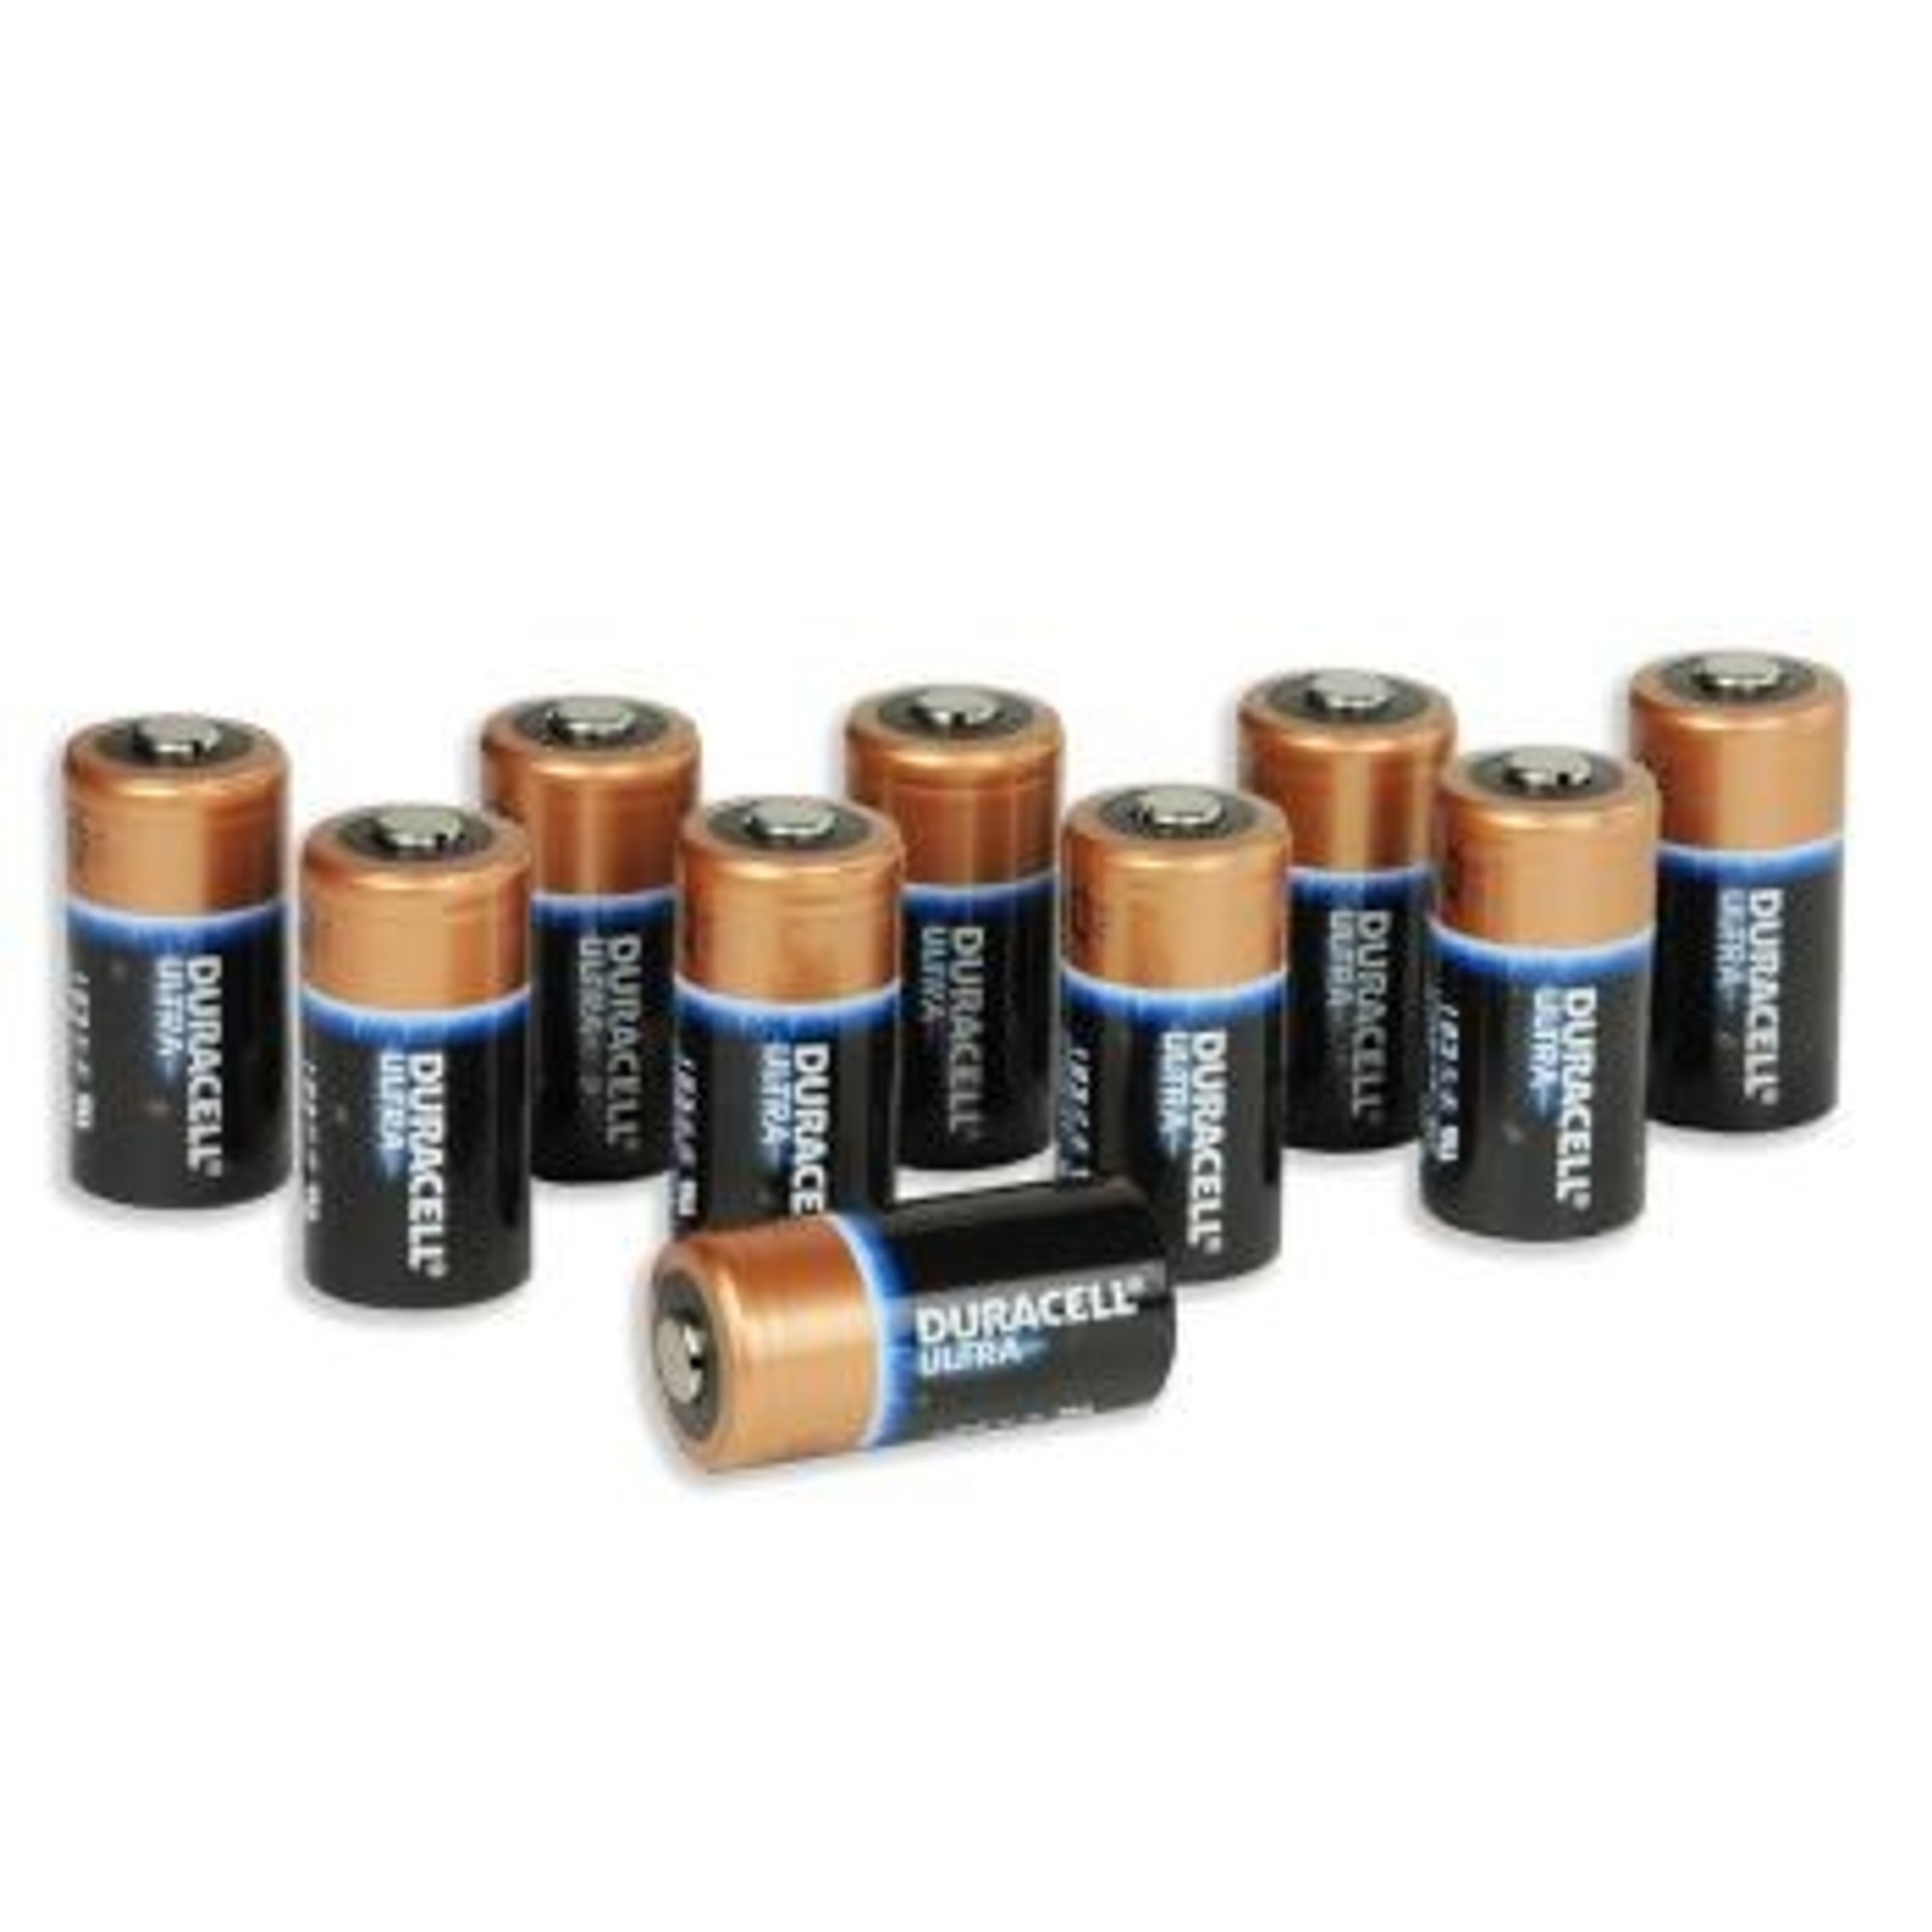 Zoll AED Plus Replacement Lithium Batteries (pkg of 10) 8000-0807-01